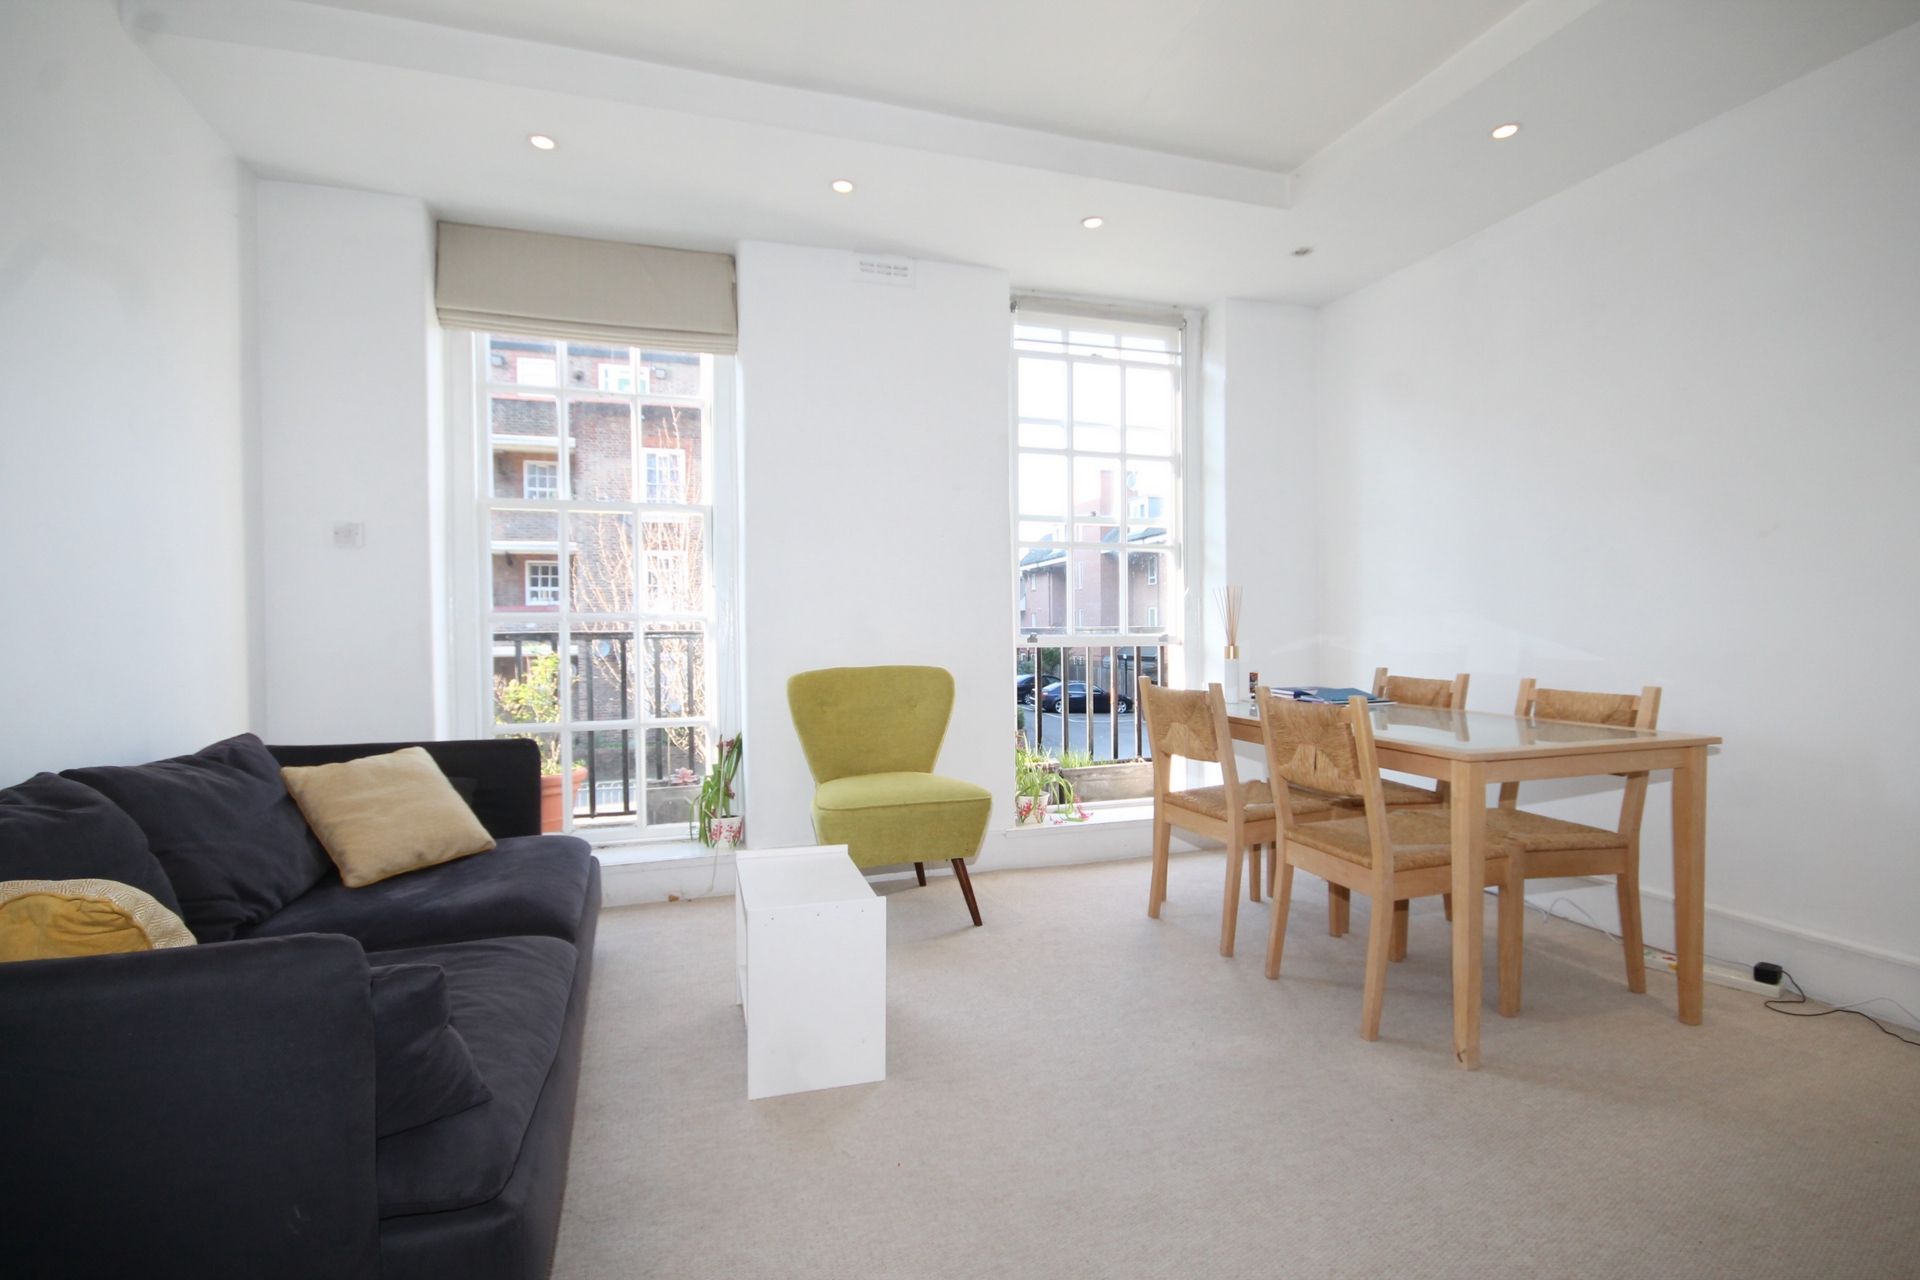 2 Bedroom Flat to rent in Marylebone, London, NW8